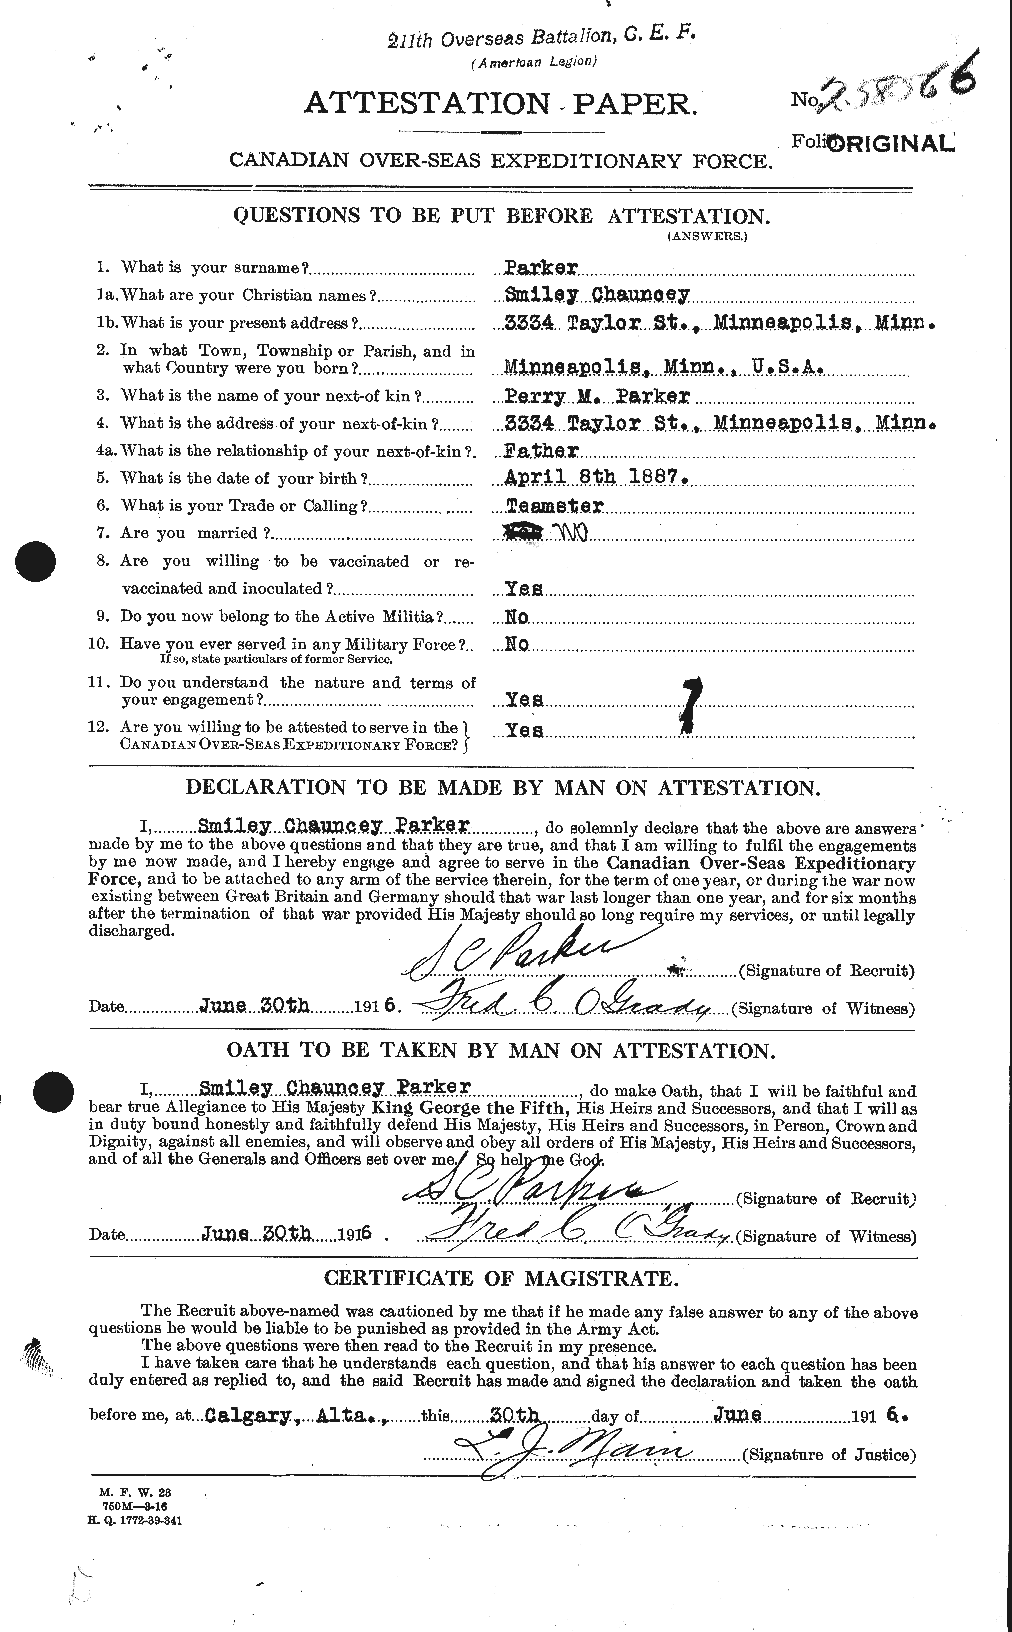 Personnel Records of the First World War - CEF 565635a